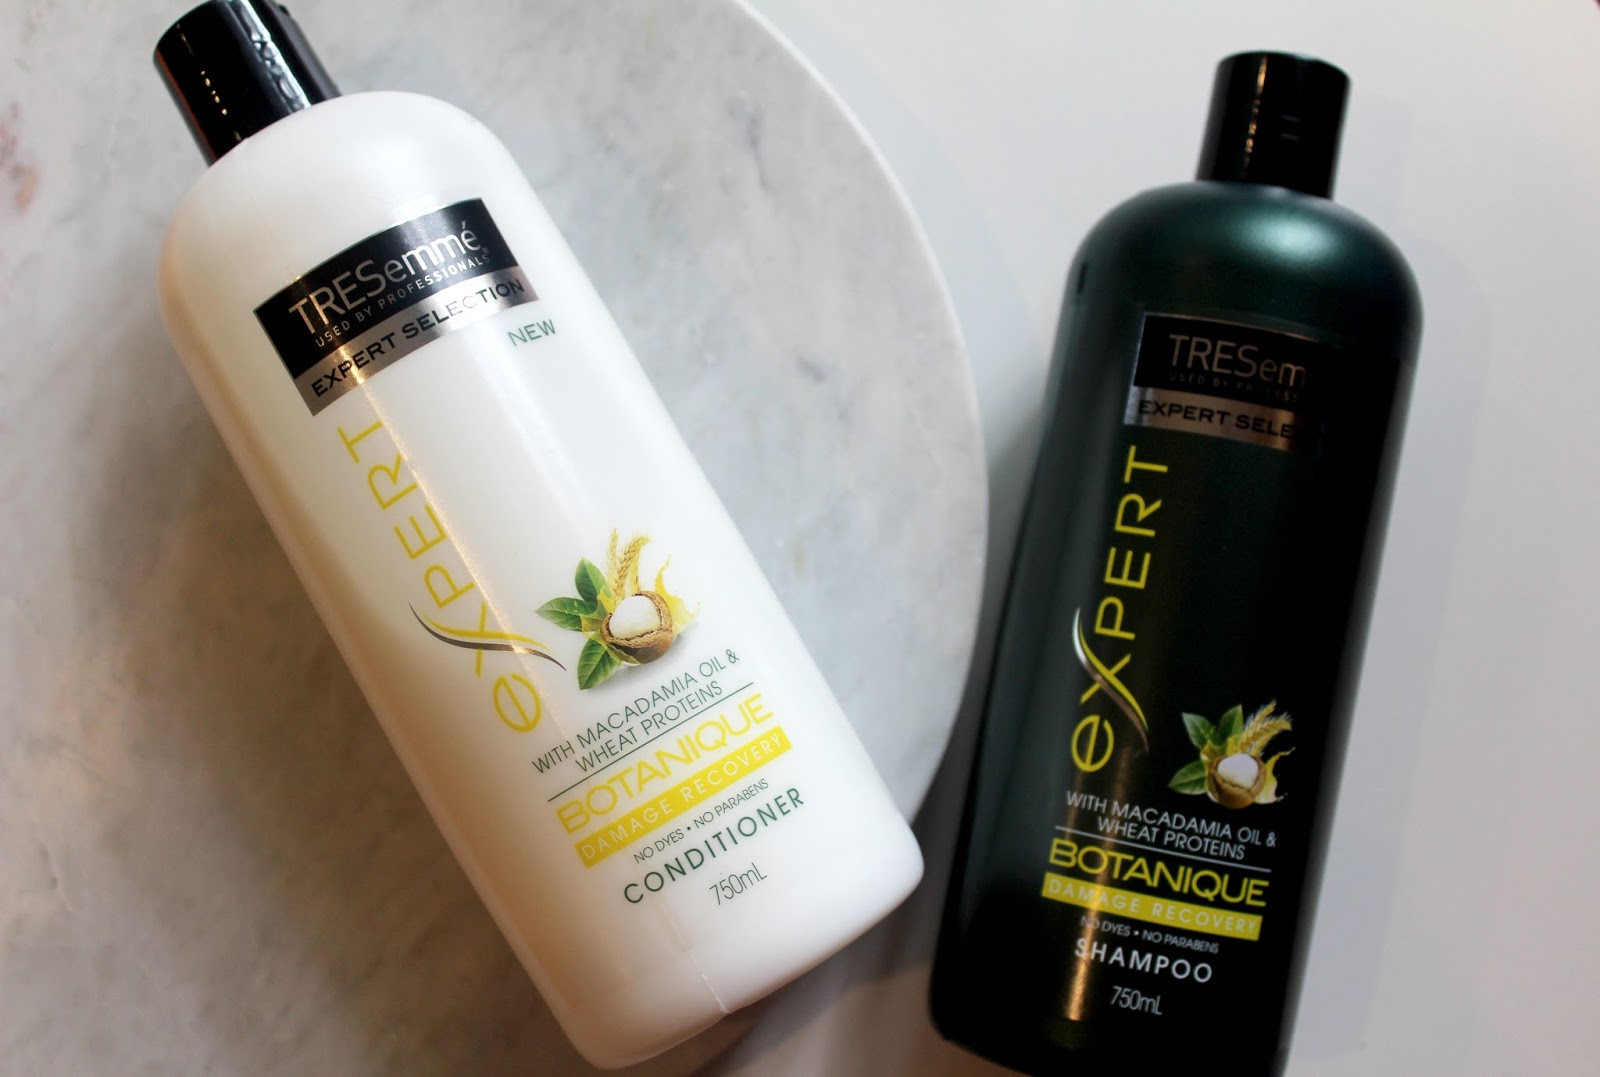 * Conditioner Botanique Recovery and Tresemme Shampoo Damage Review: